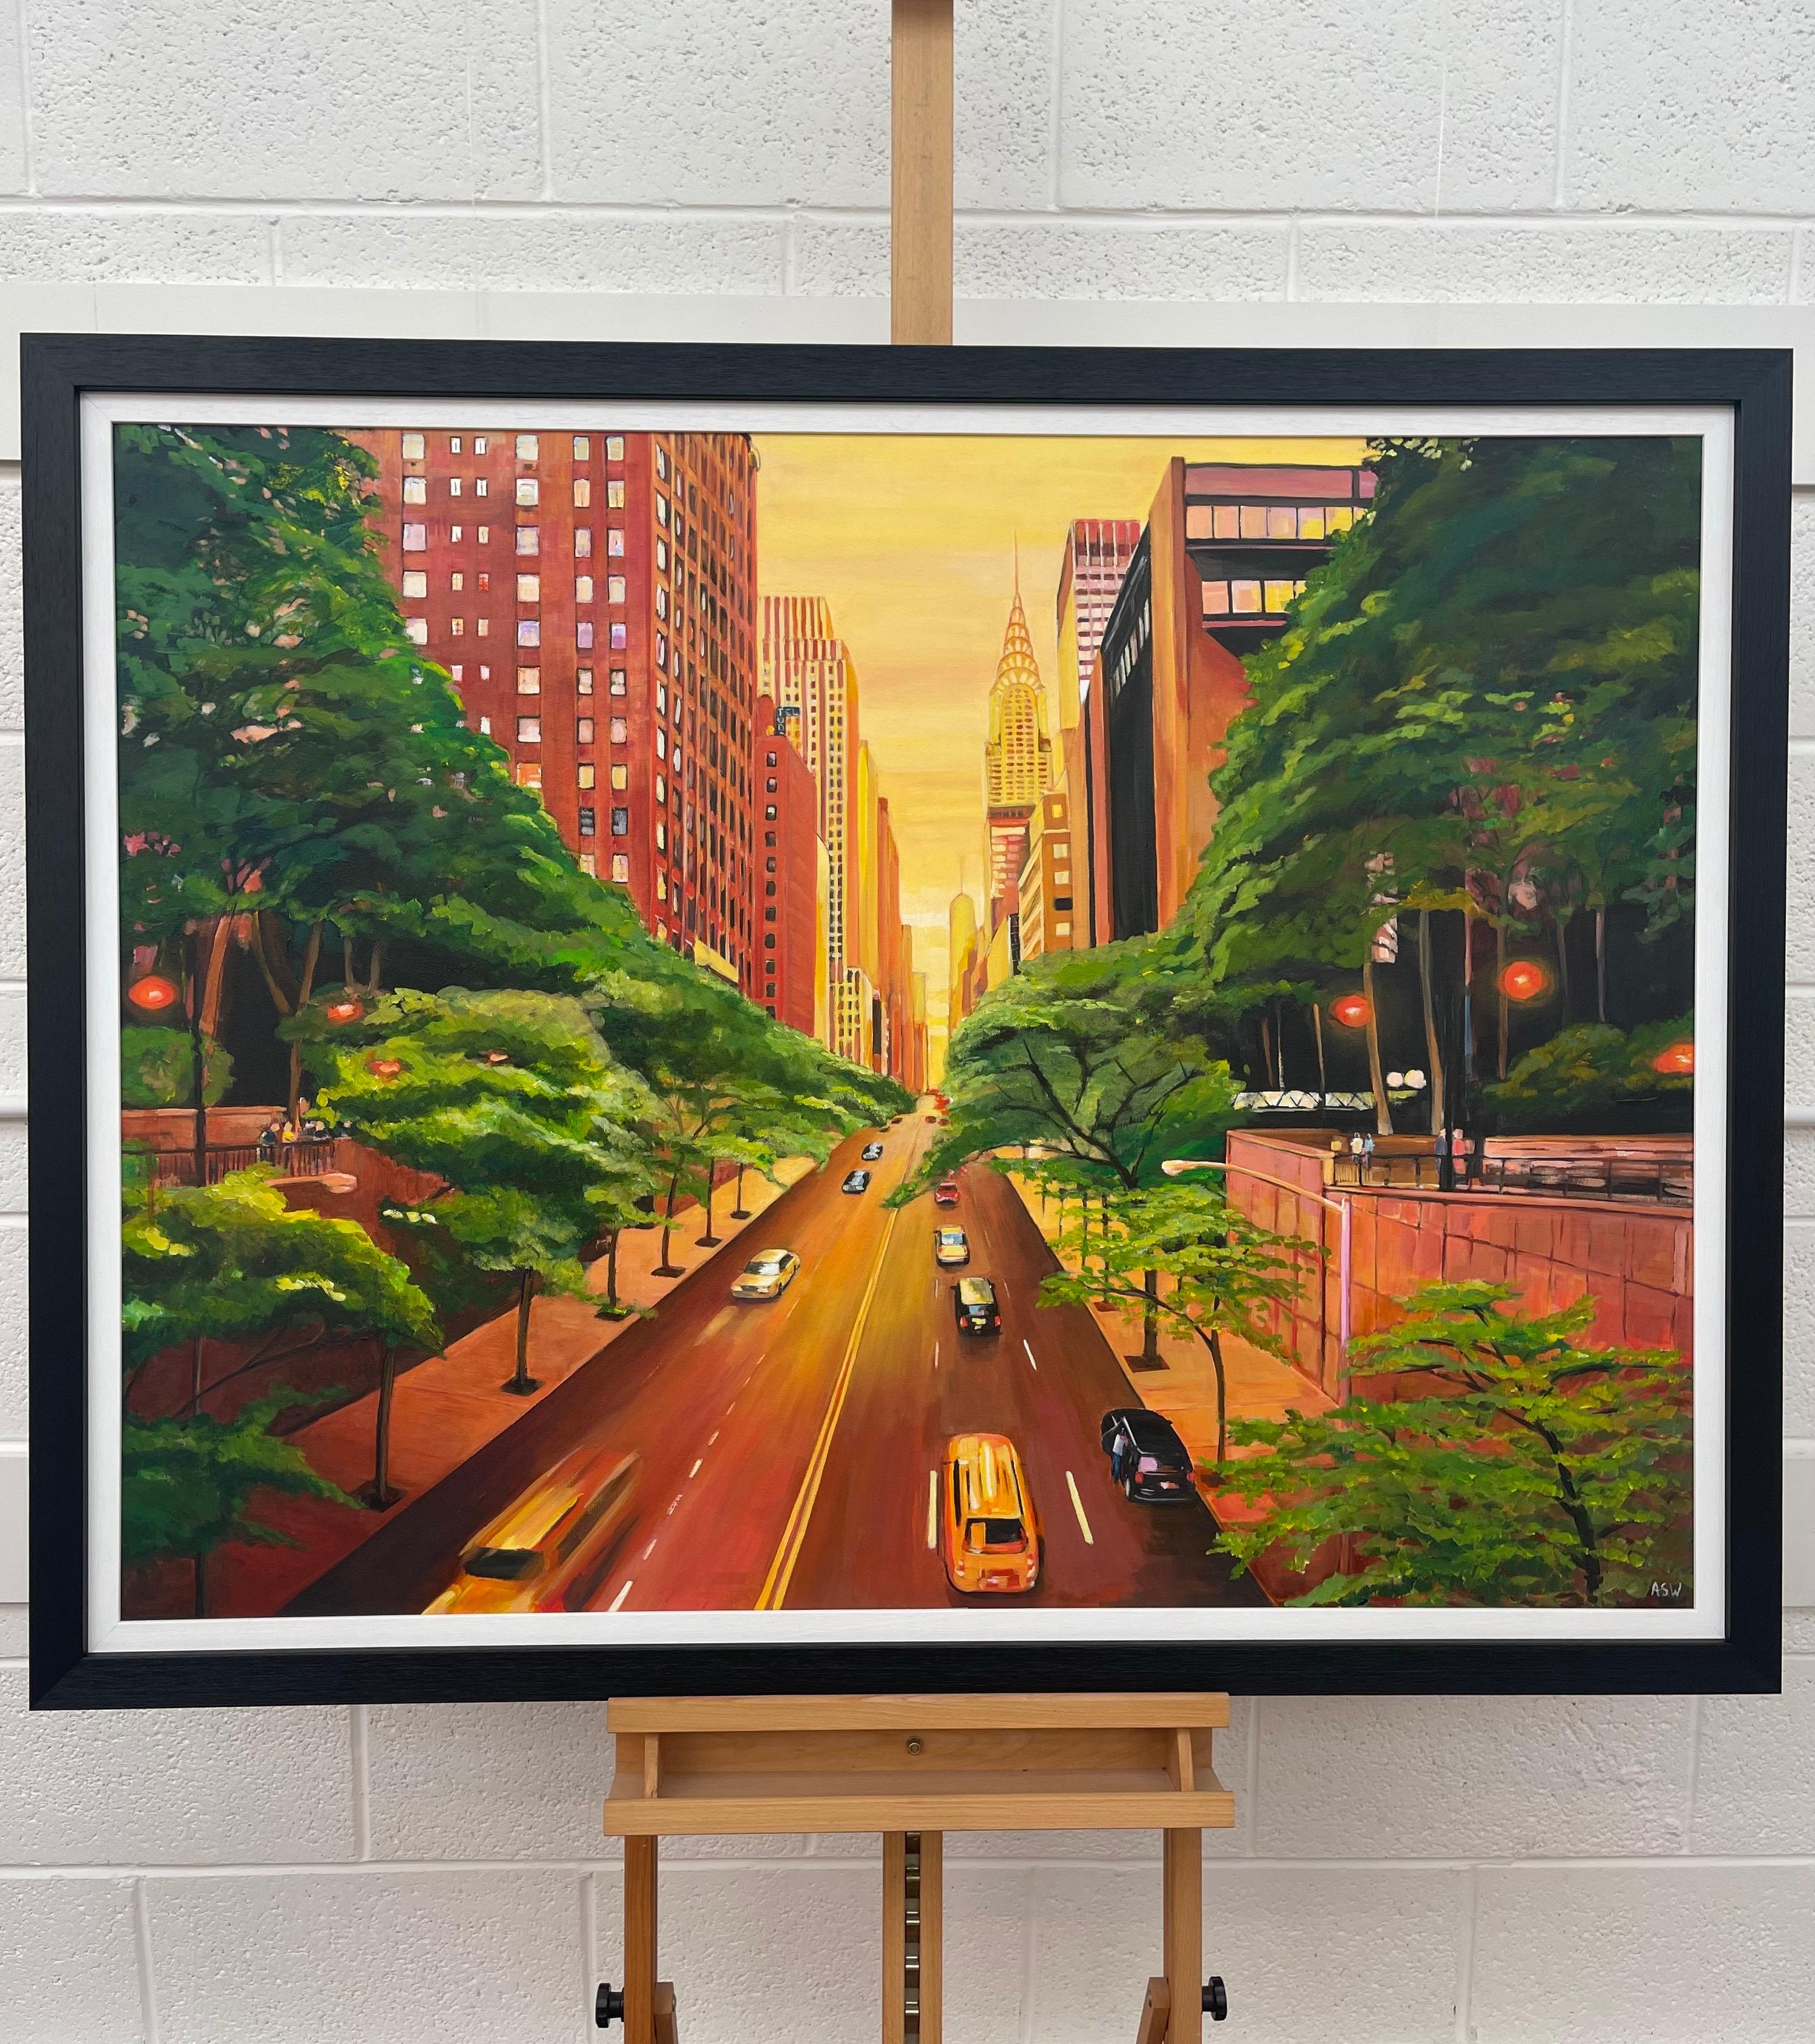 Original Painting of The Chrysler Building on 42nd Street New York City by Contemporary British Artist Angela Wakefield. The warm yellow colours used in the sky creates a vivid contrast with the lush greens in the foreground. The Manhattan